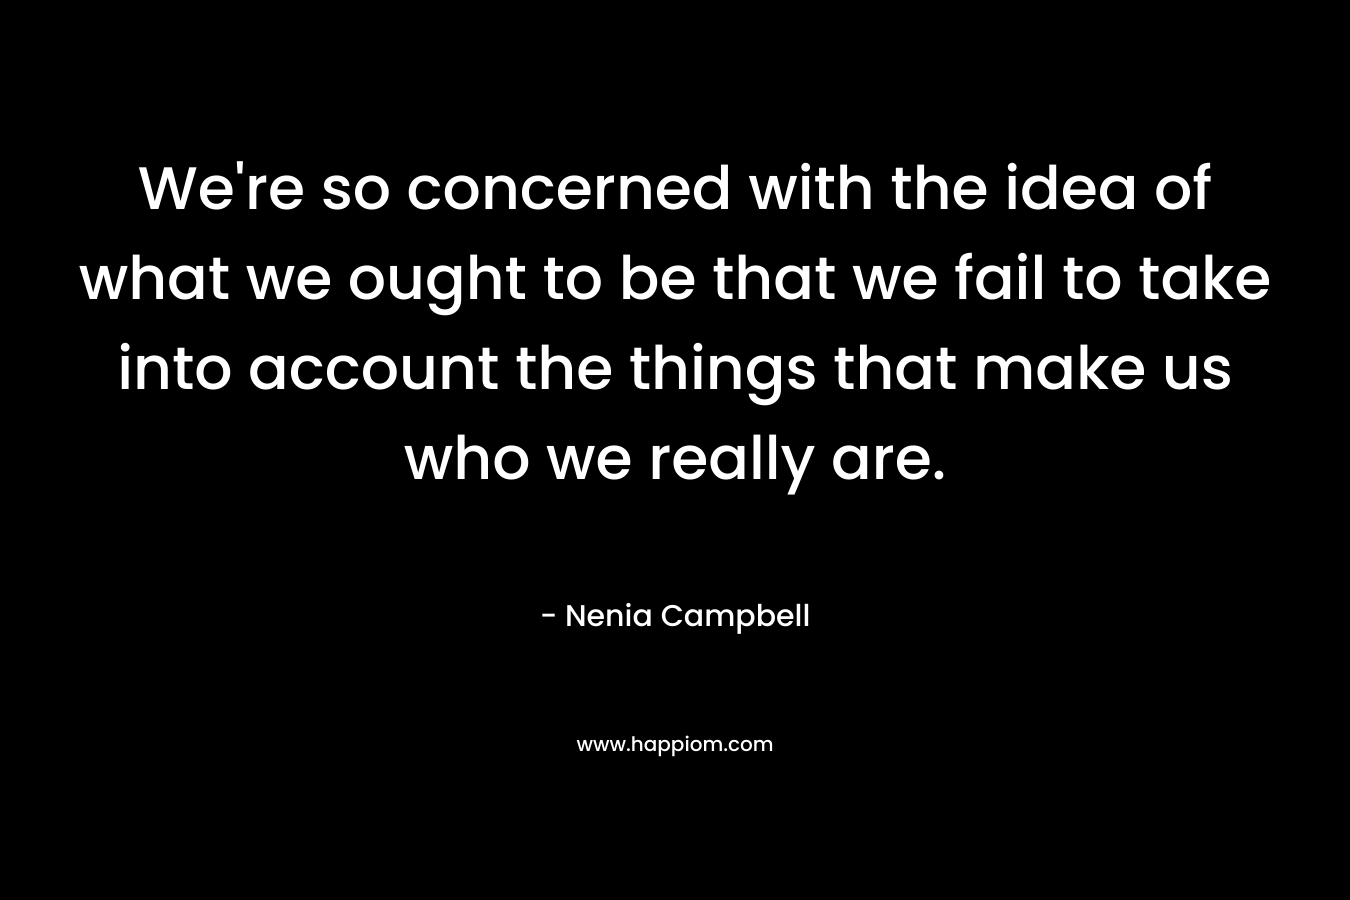 We’re so concerned with the idea of what we ought to be that we fail to take into account the things that make us who we really are. – Nenia Campbell